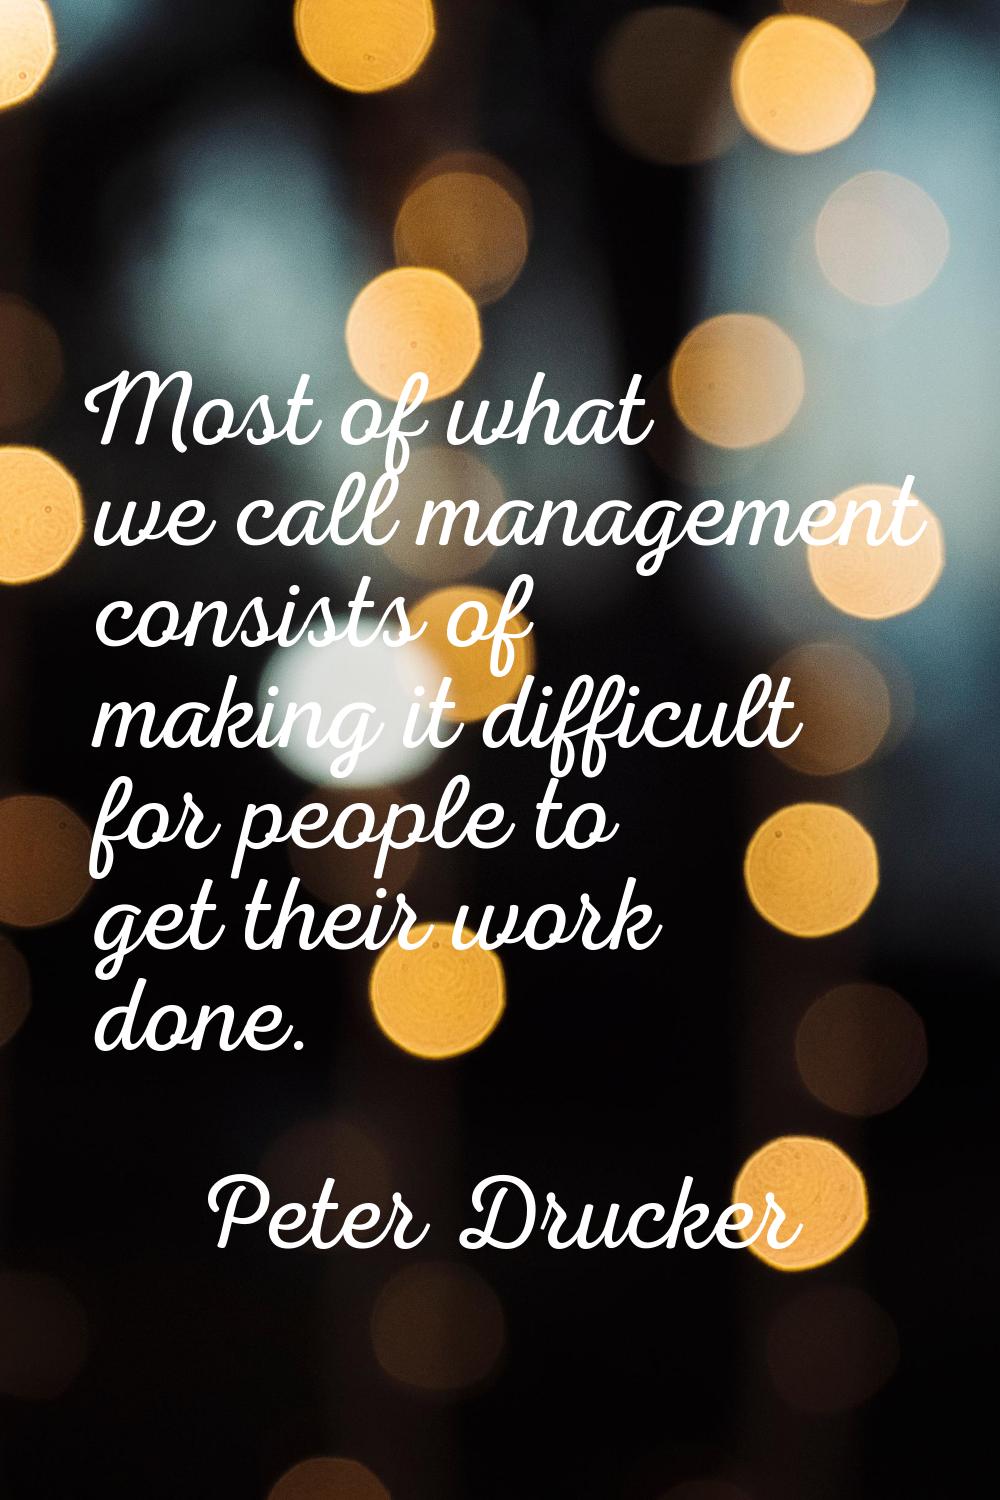 Most of what we call management consists of making it difficult for people to get their work done.